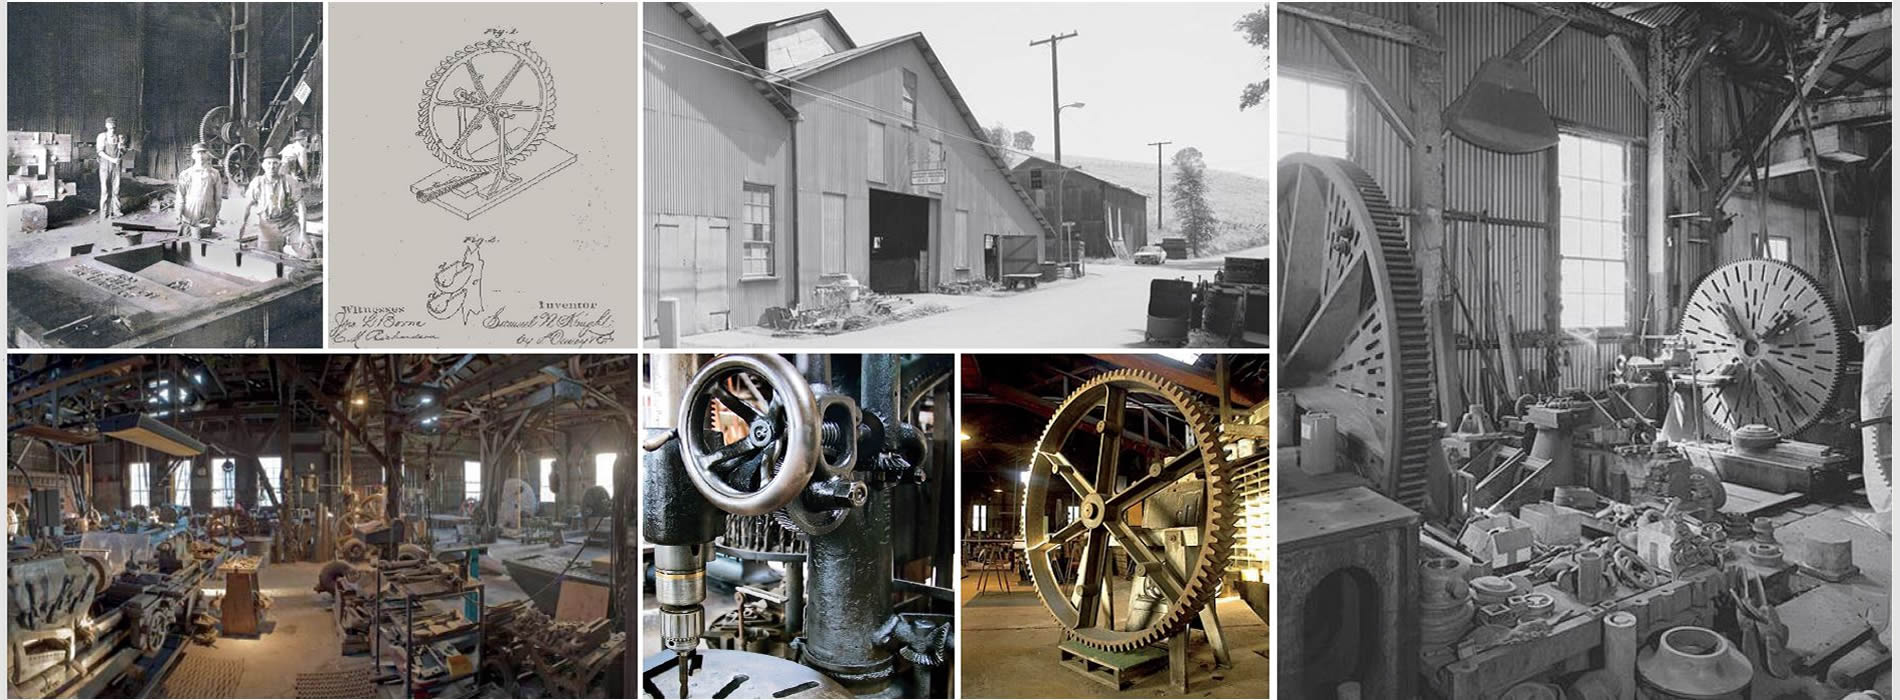 sutter creek knight foundry water powered foundry & machine shop